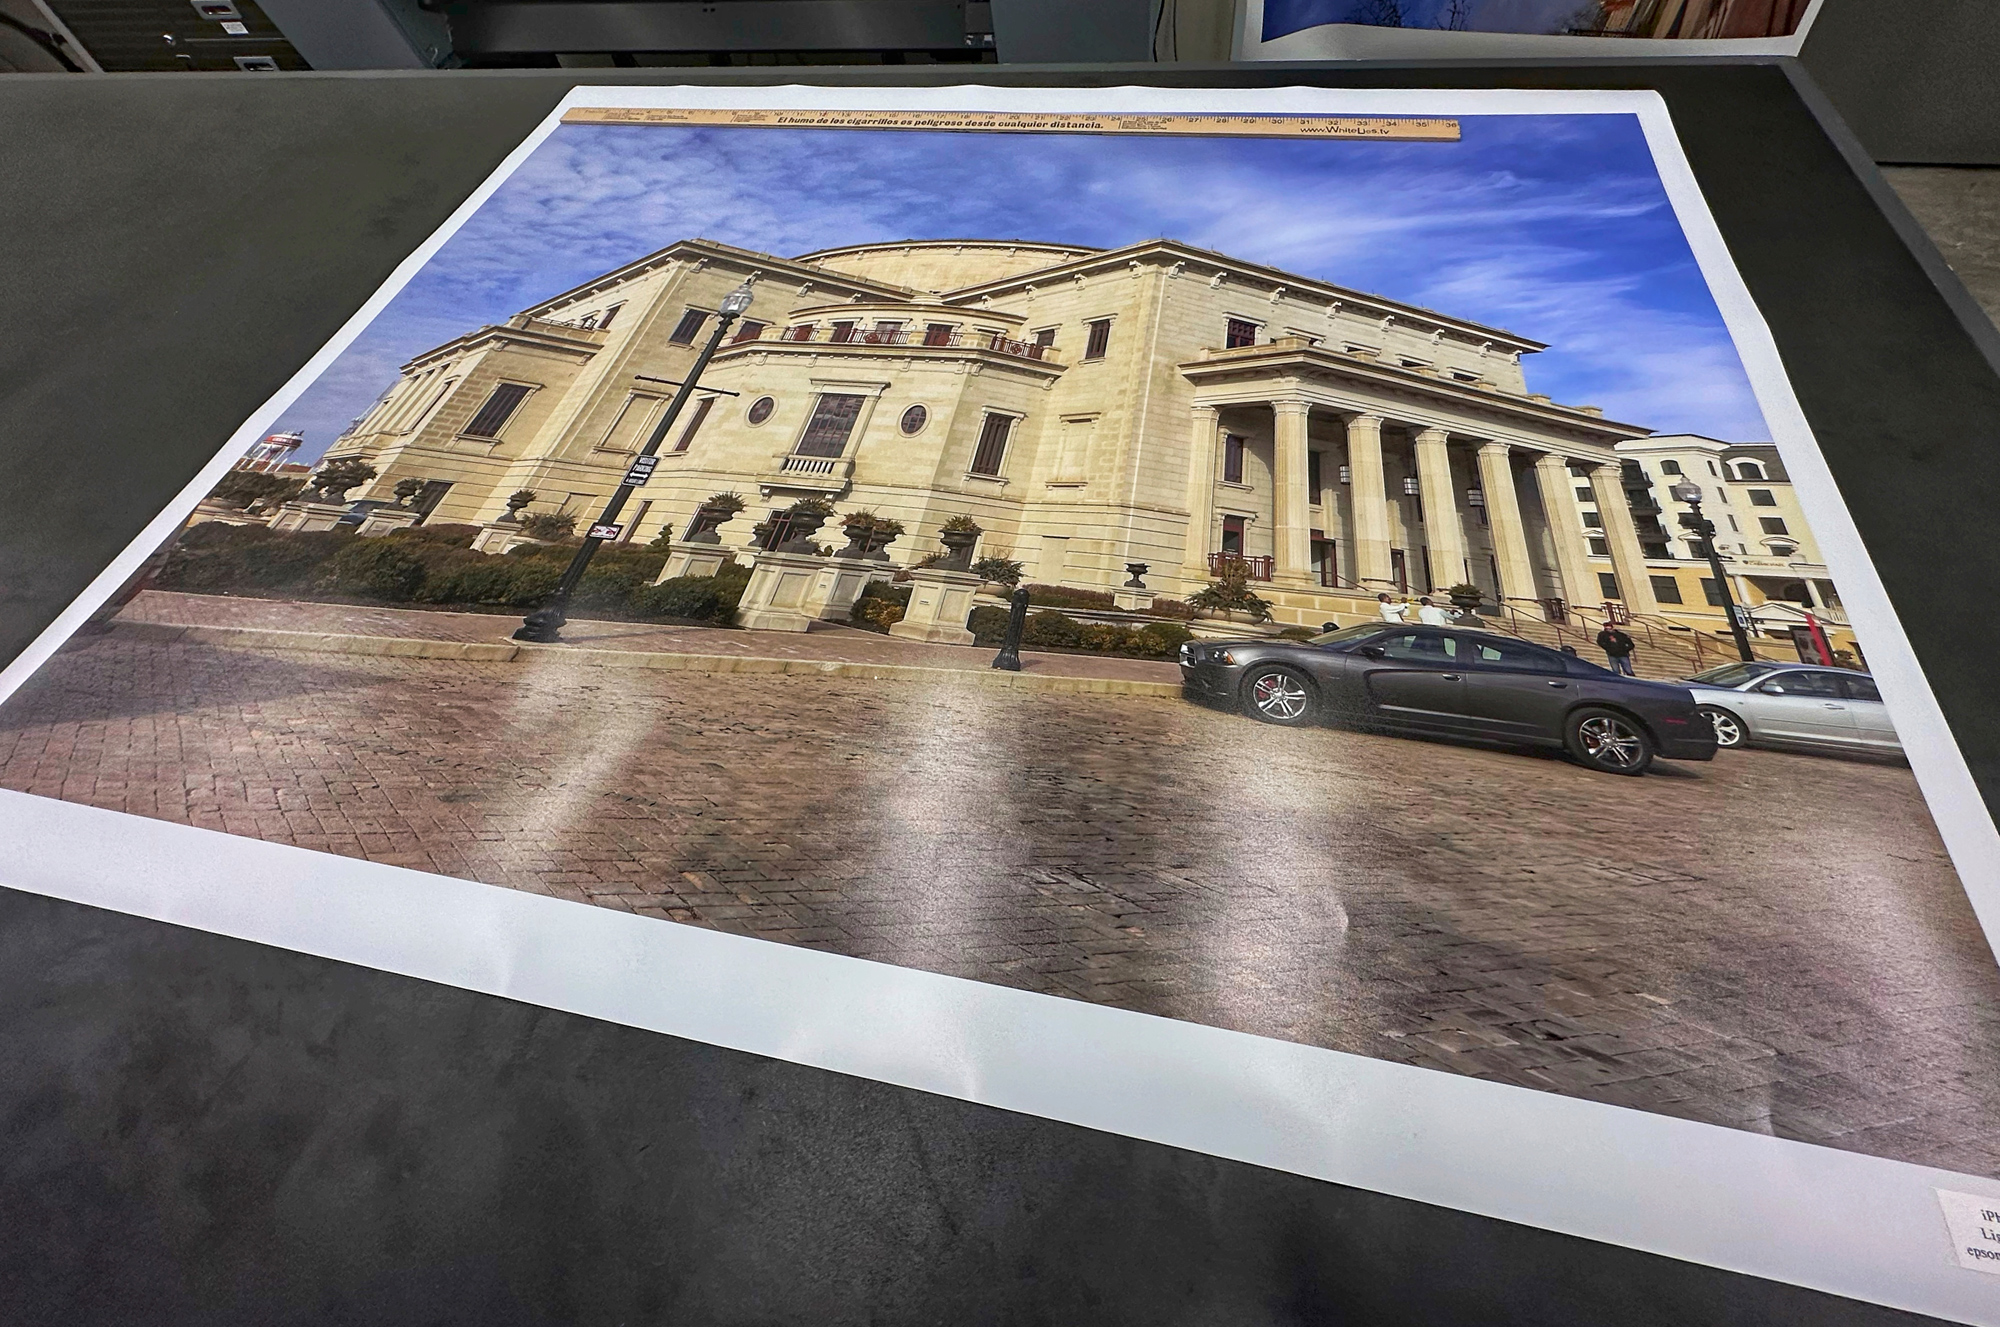 A 42 inch wide image on a 44 inch wide piece of Epson Pro Luster Paper